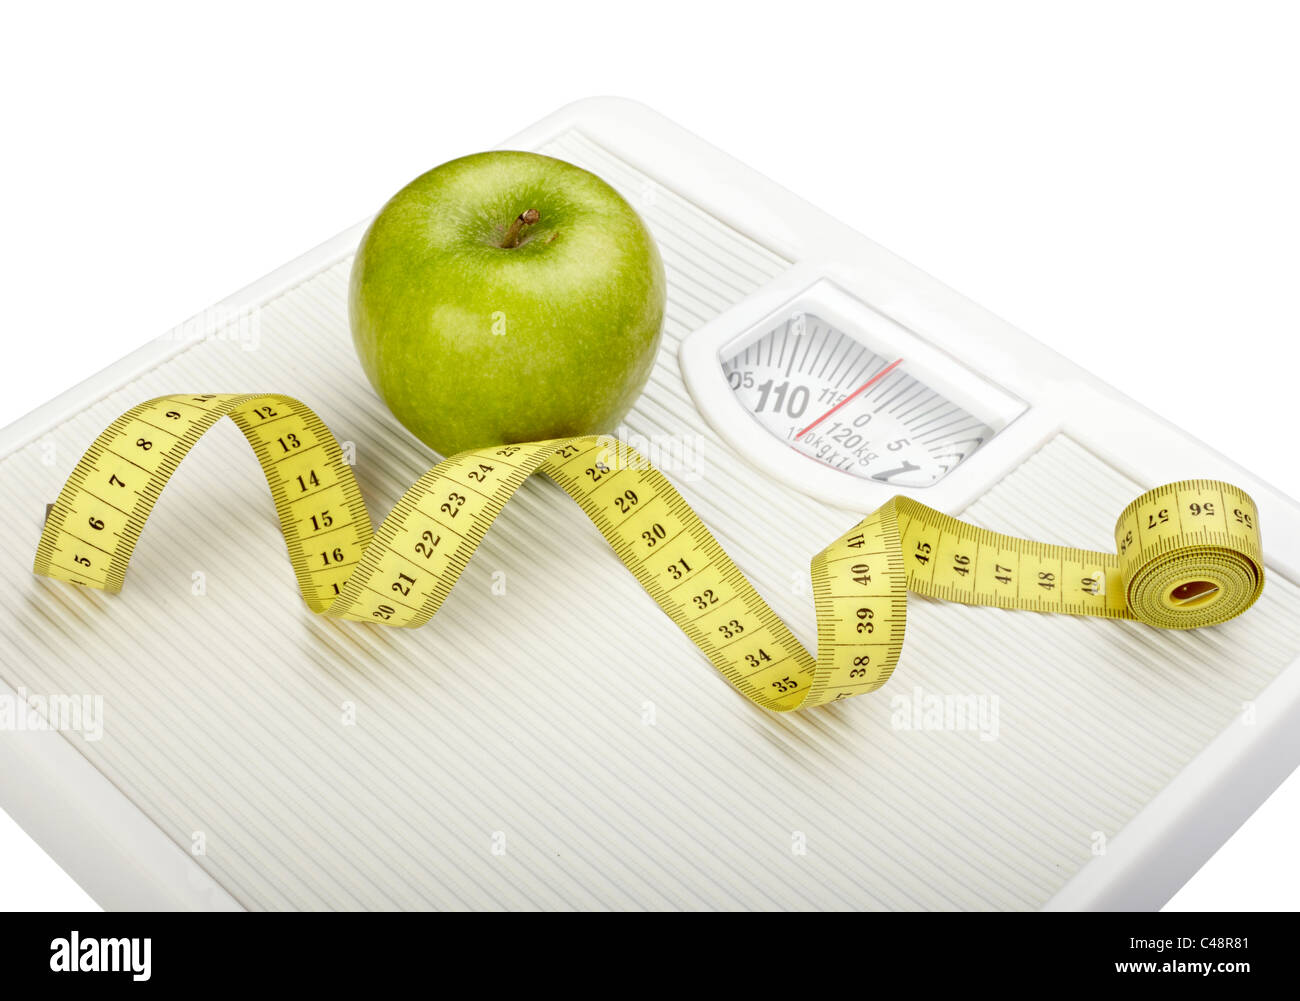 Apples On Red Scales Stock Photo - Download Image Now - Fruit, Weight Scale,  Apple - Fruit - iStock